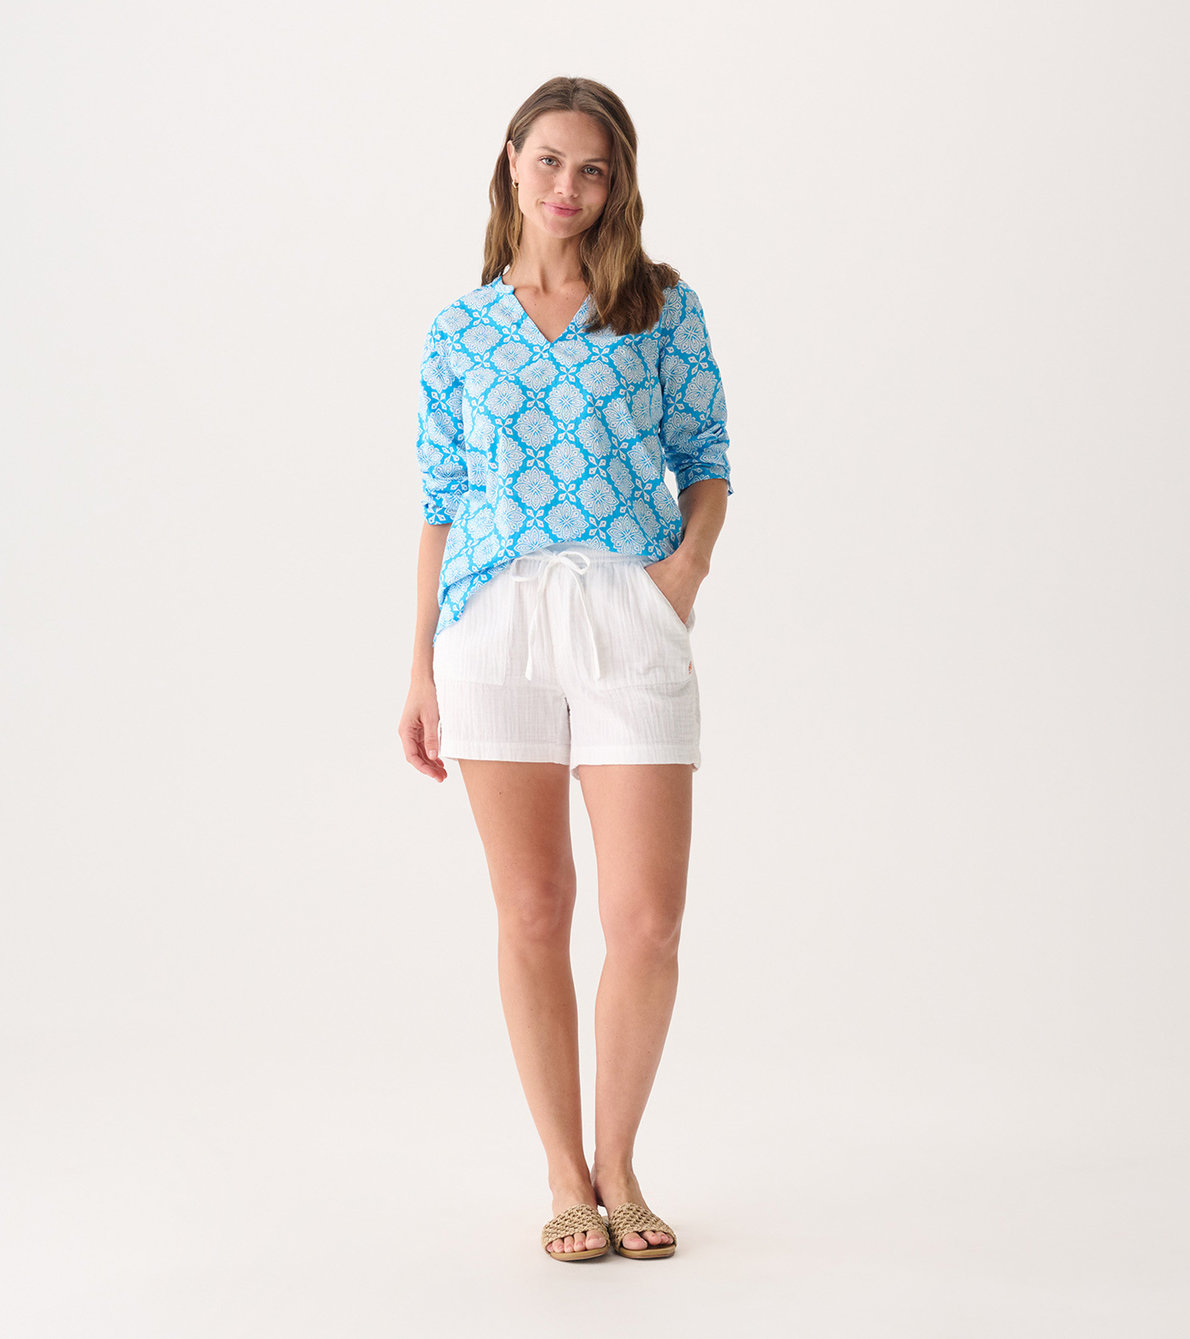 View larger image of Women's Gradient Flowers Delray Beach Tunic